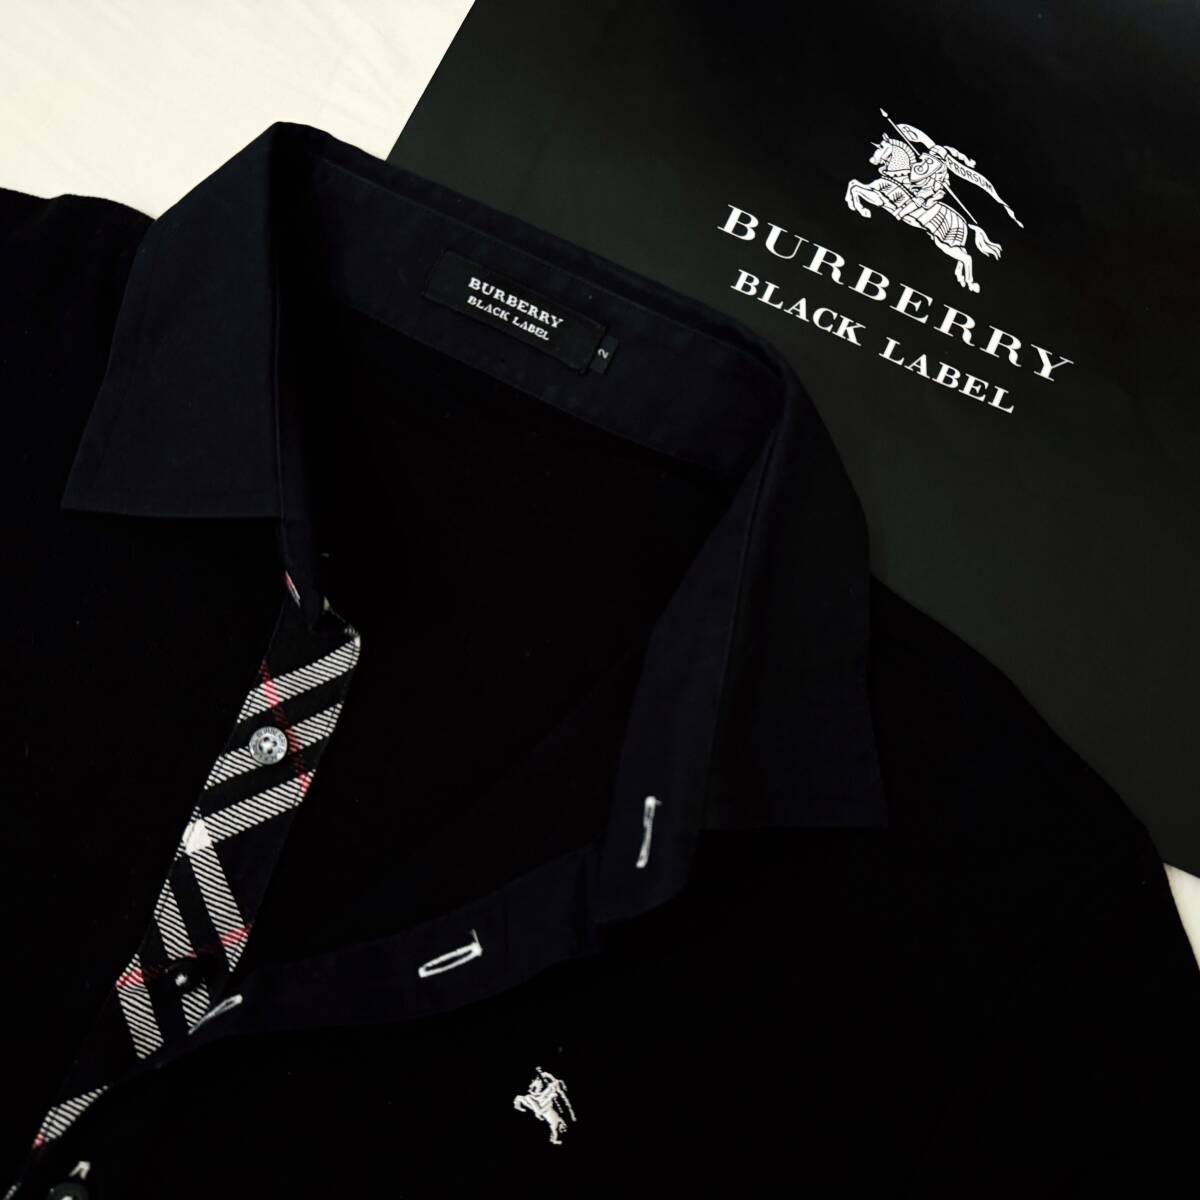  beautiful name of product work BURBERRY BLACK LABEL Burberry Black Label polo-shirt with short sleeves deer. . front .noba check hose embroidery black 2(M) made in Japan #2753